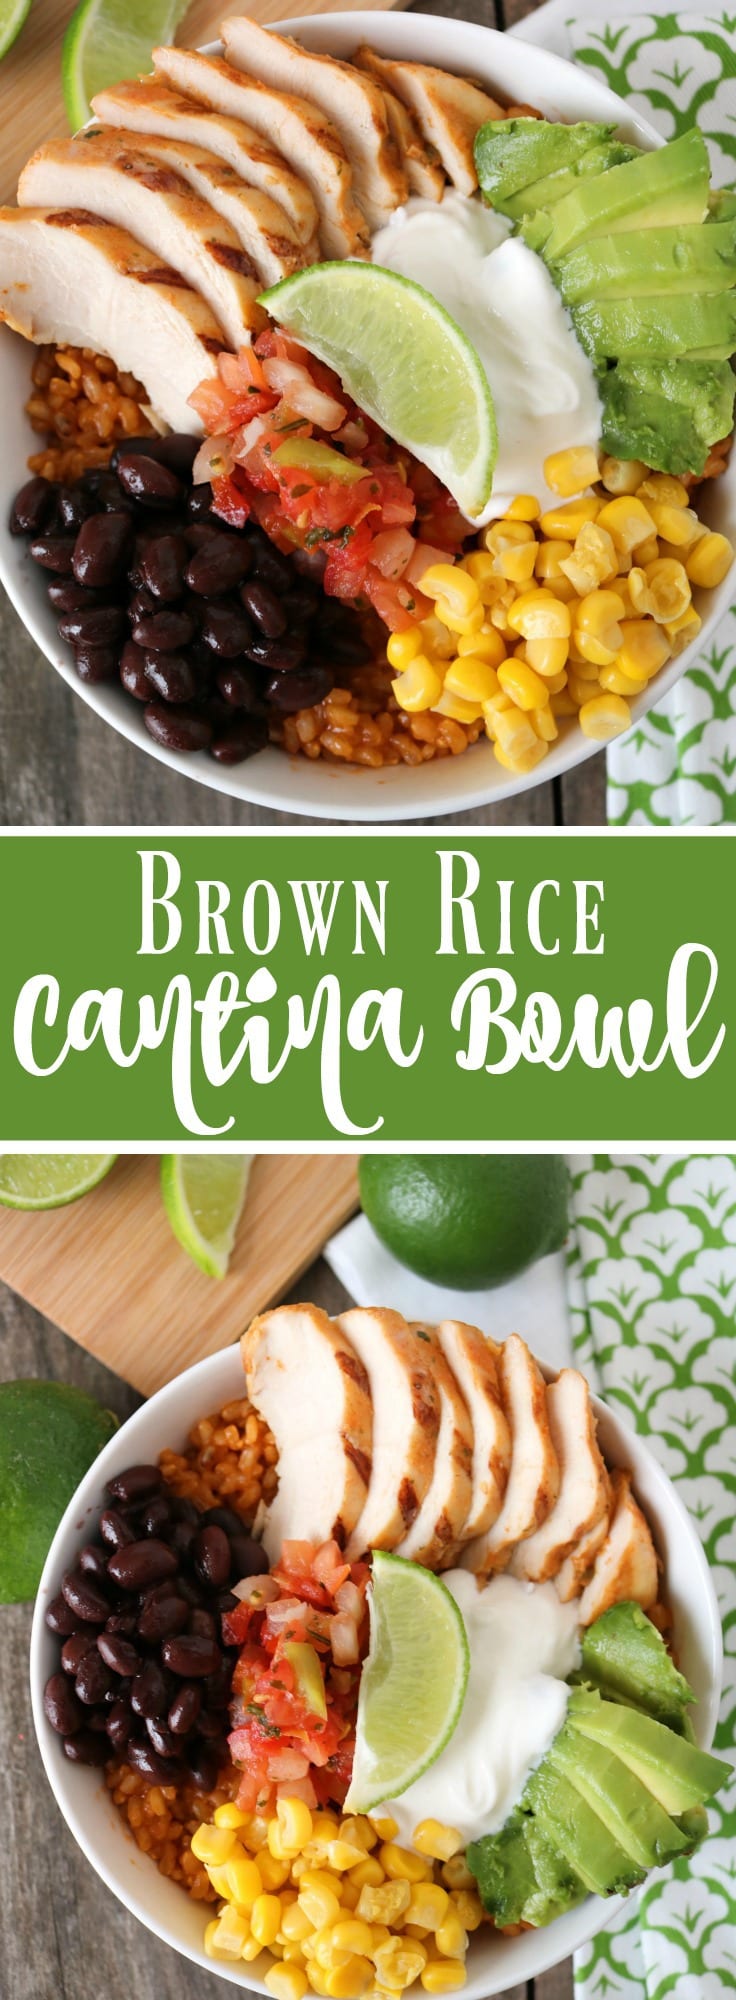 Cook your brown rice in enchilada sauce to give this Brown Rice Cantina Bowl and extra kick!